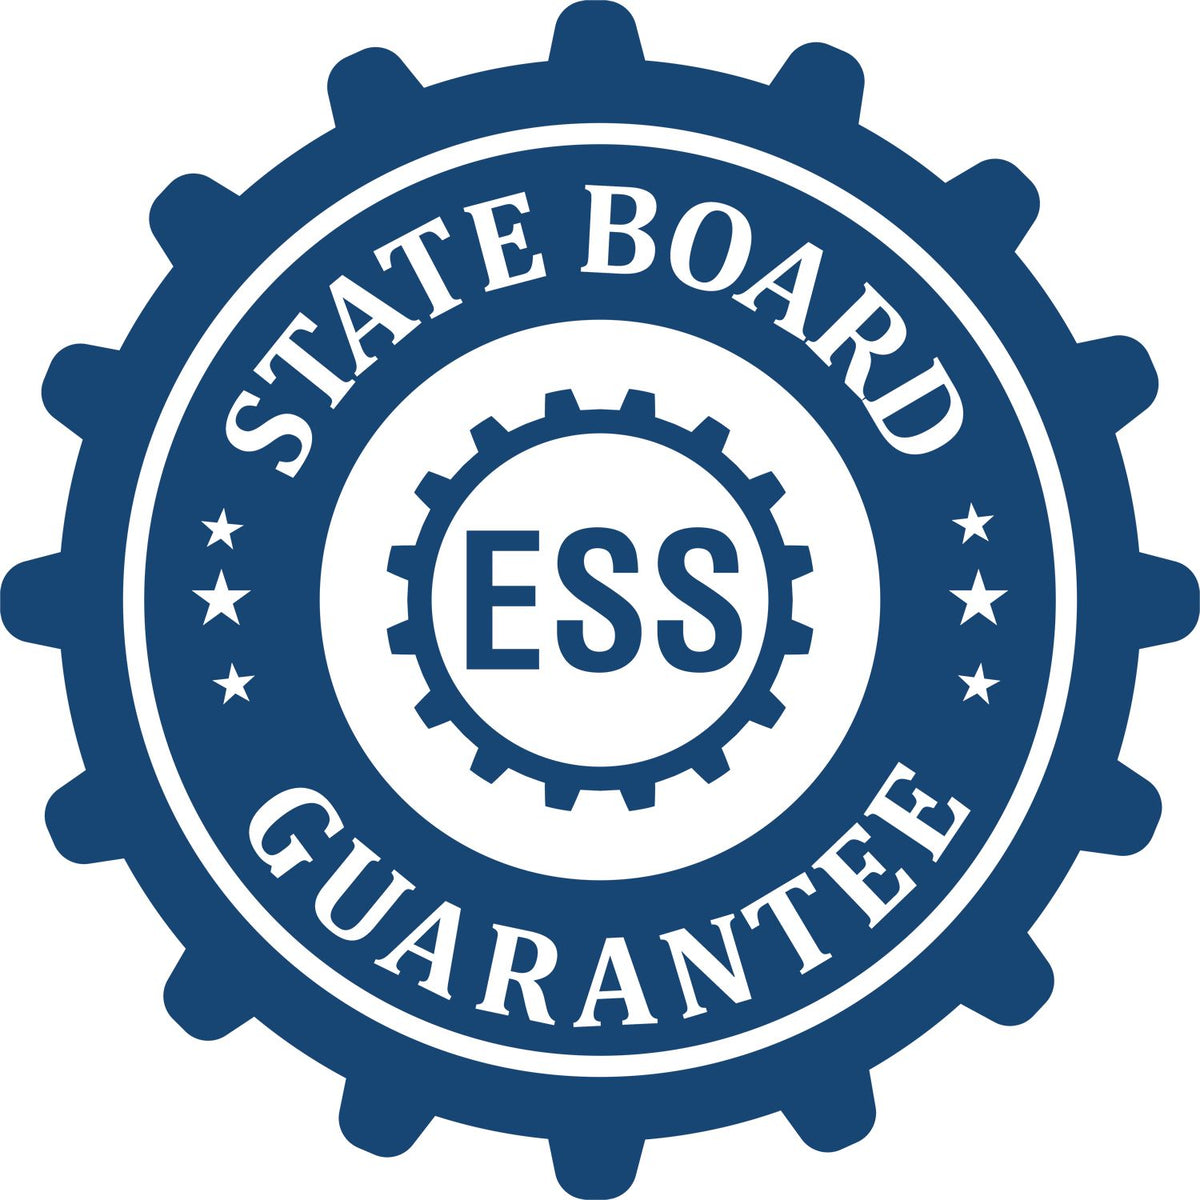 An emblem in a gear shape illustrating a state board guarantee for the Handheld Louisiana Land Surveyor Seal product.